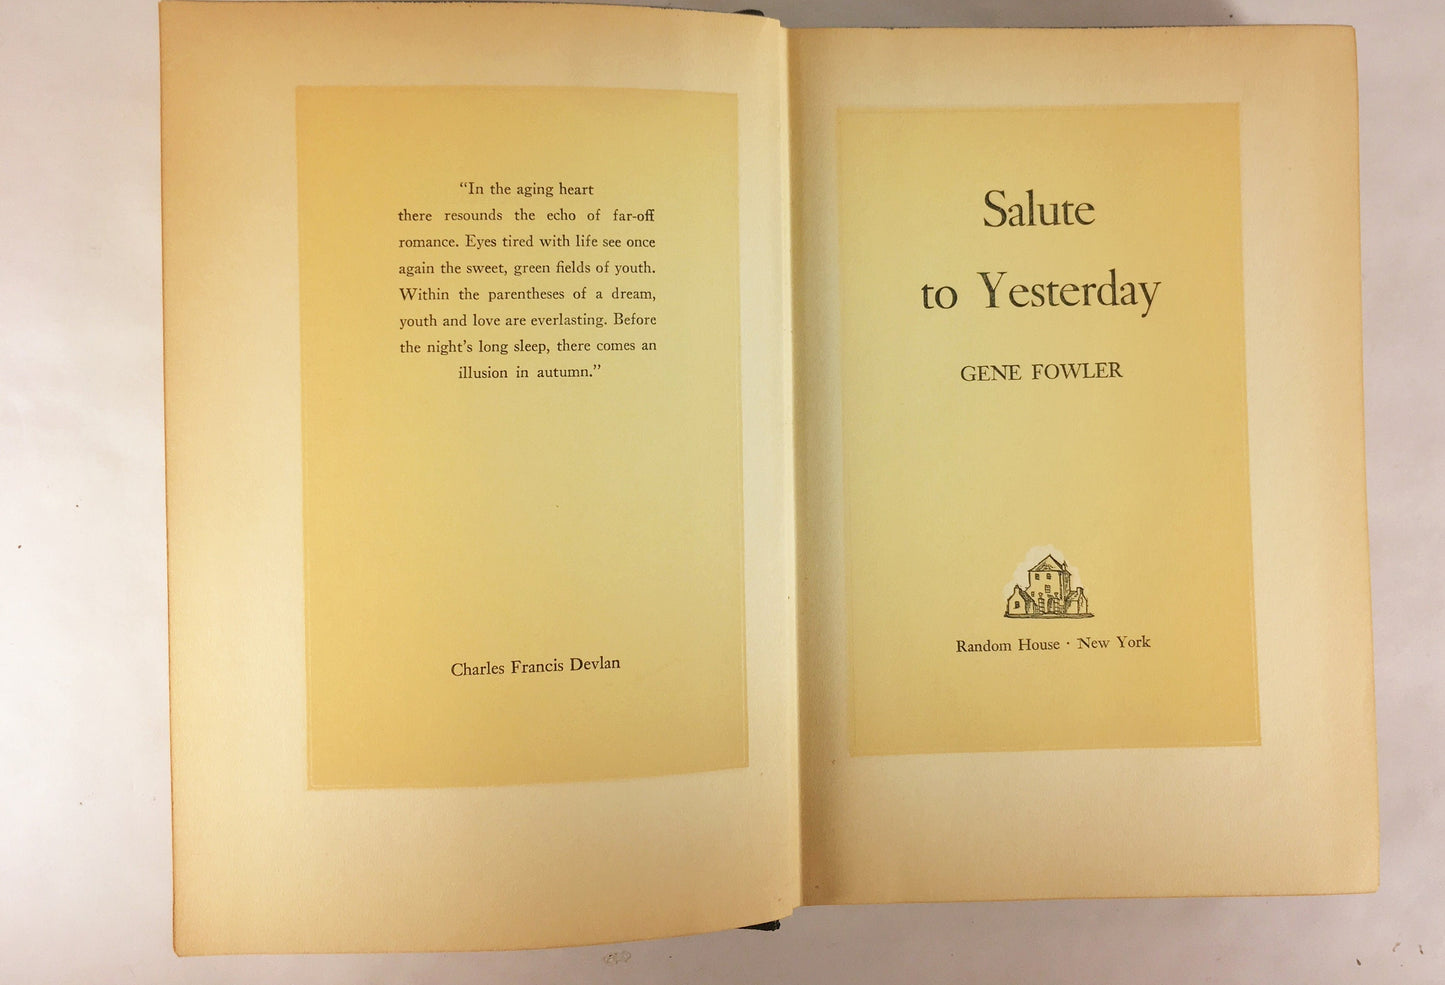 Salute To Yesterday by Gene Fowler, close friend of WC Fields & Robert Lewis Taylor. FIRST EDITION vintage book circa 1937 Blue green decor